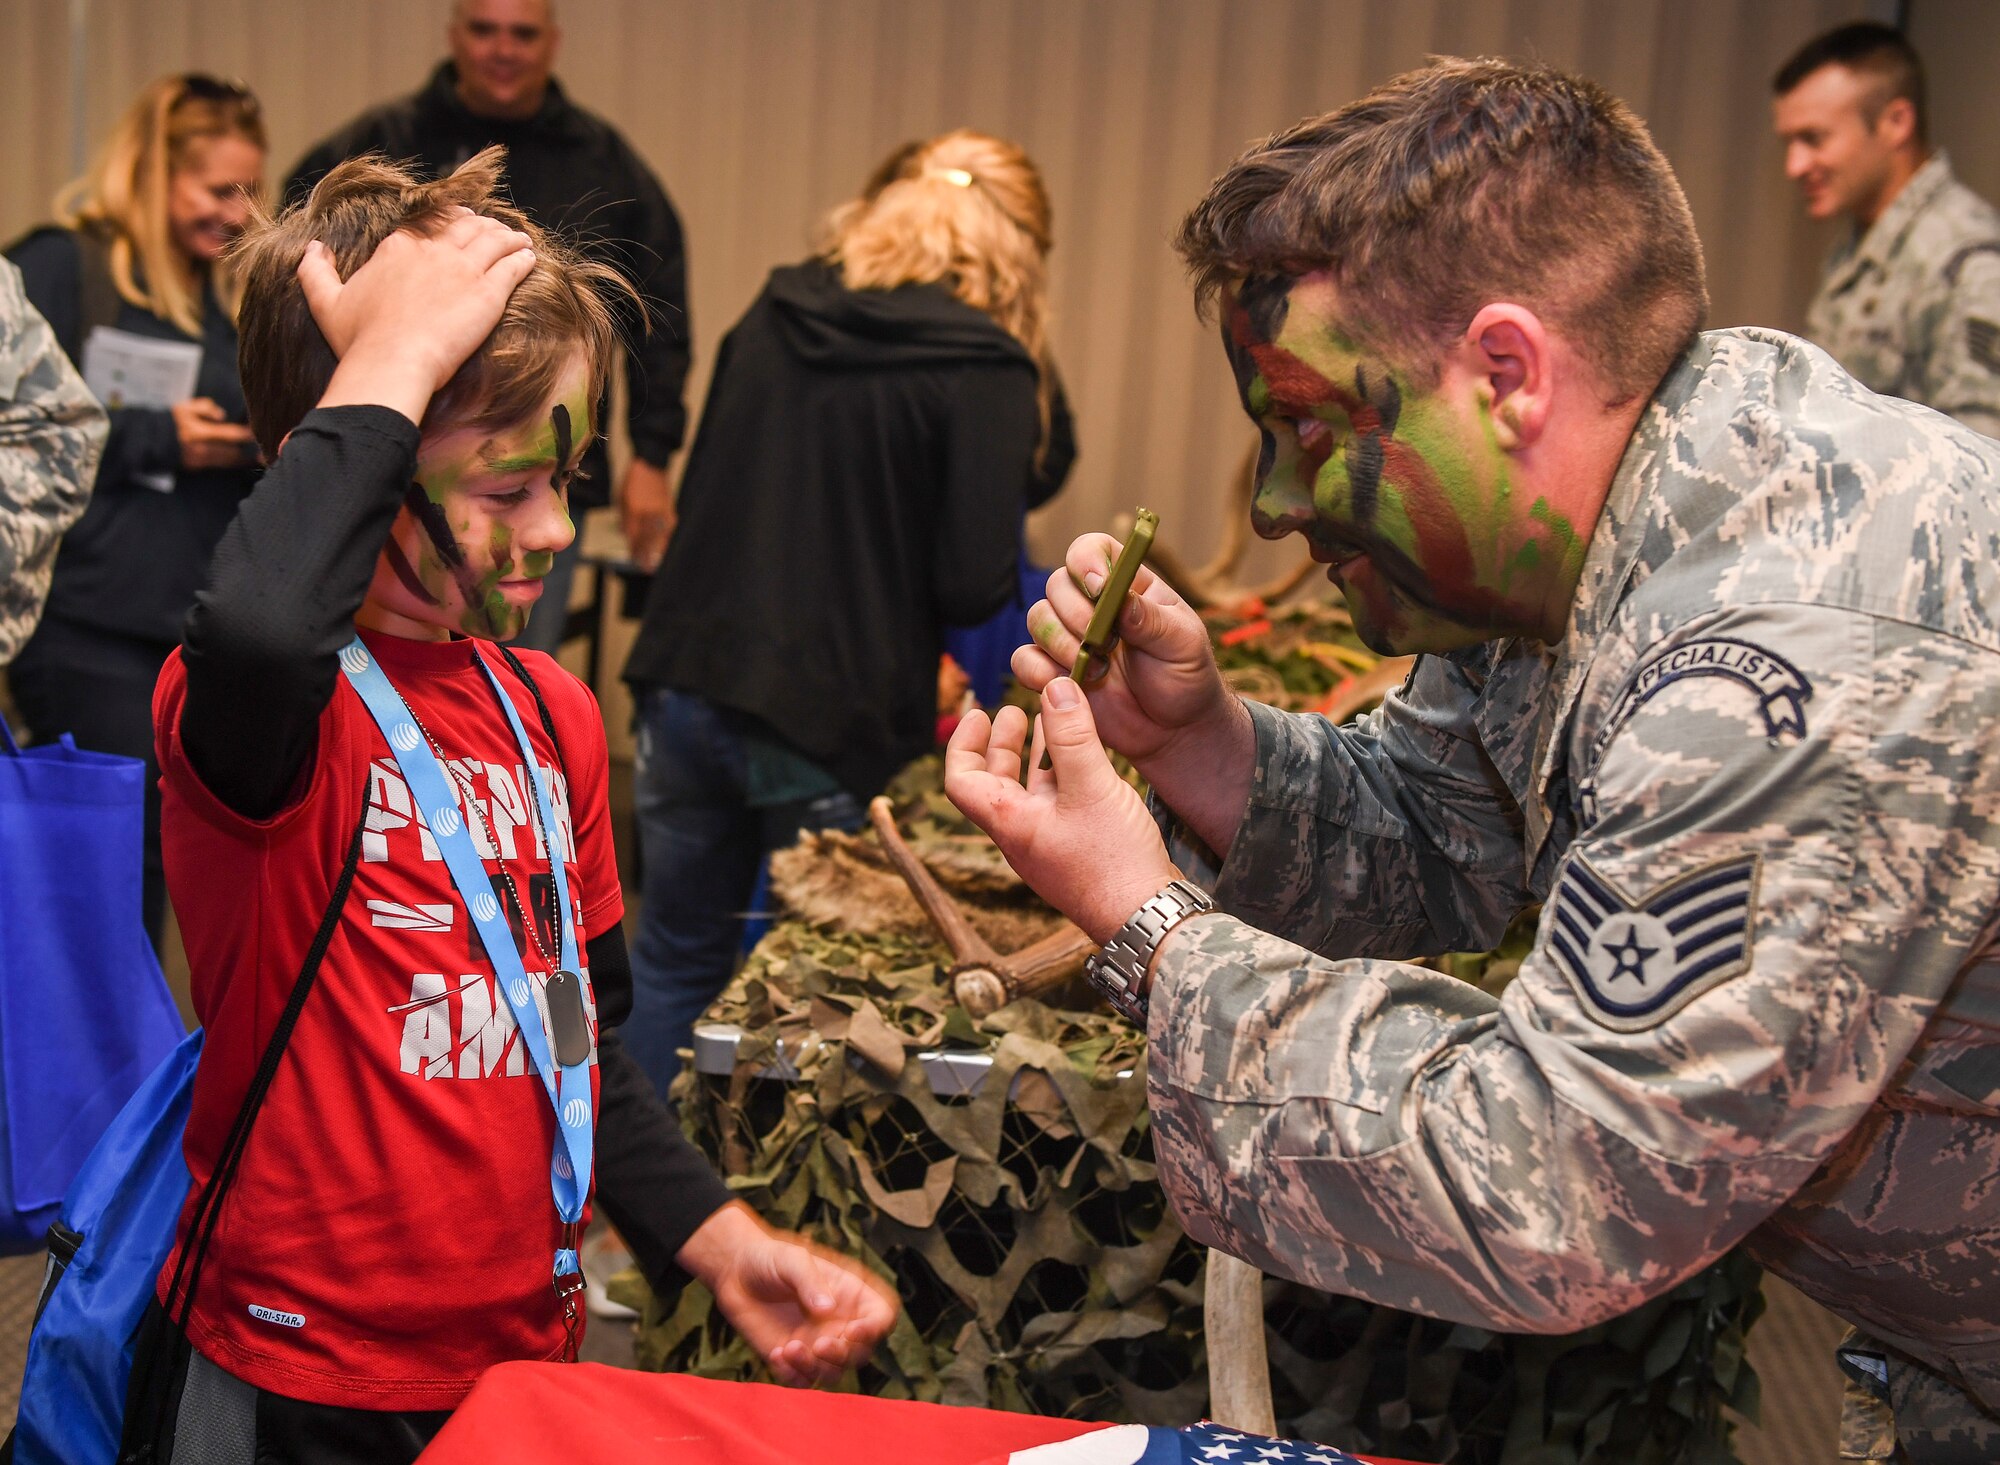 Operation Heroes is an annual event that allows children to experience a pre-departure briefing and demonstrations from more than 10 different units around base. During the event, children tasted Meals Ready-to-Eat, got their faces painted, saw Explosive Ordnance Disposal demonstrations and weapons displays.